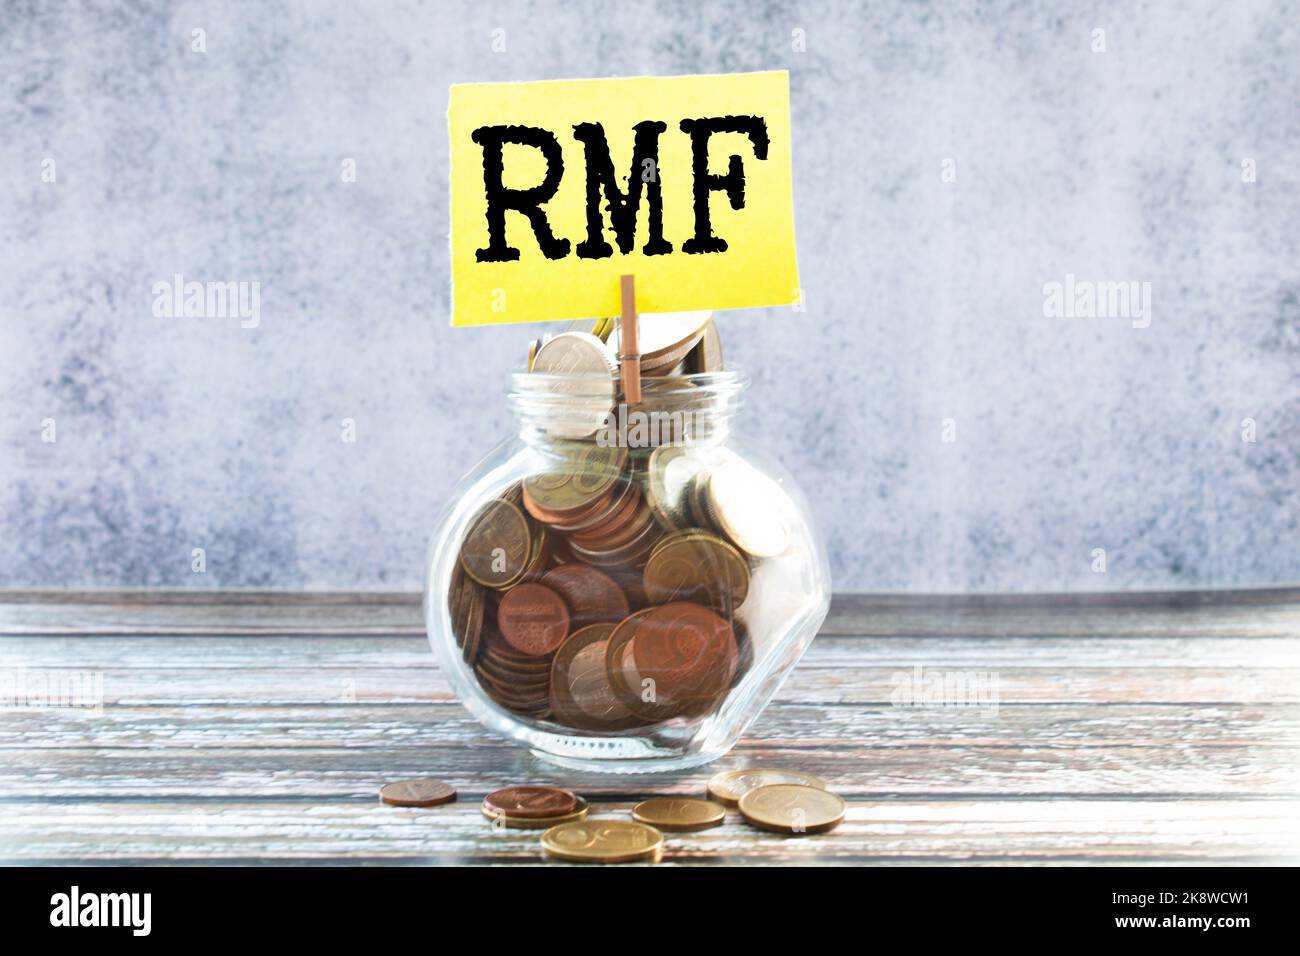 Businessman hand with pen pointing to RMF sign on the paper. Stock Photo